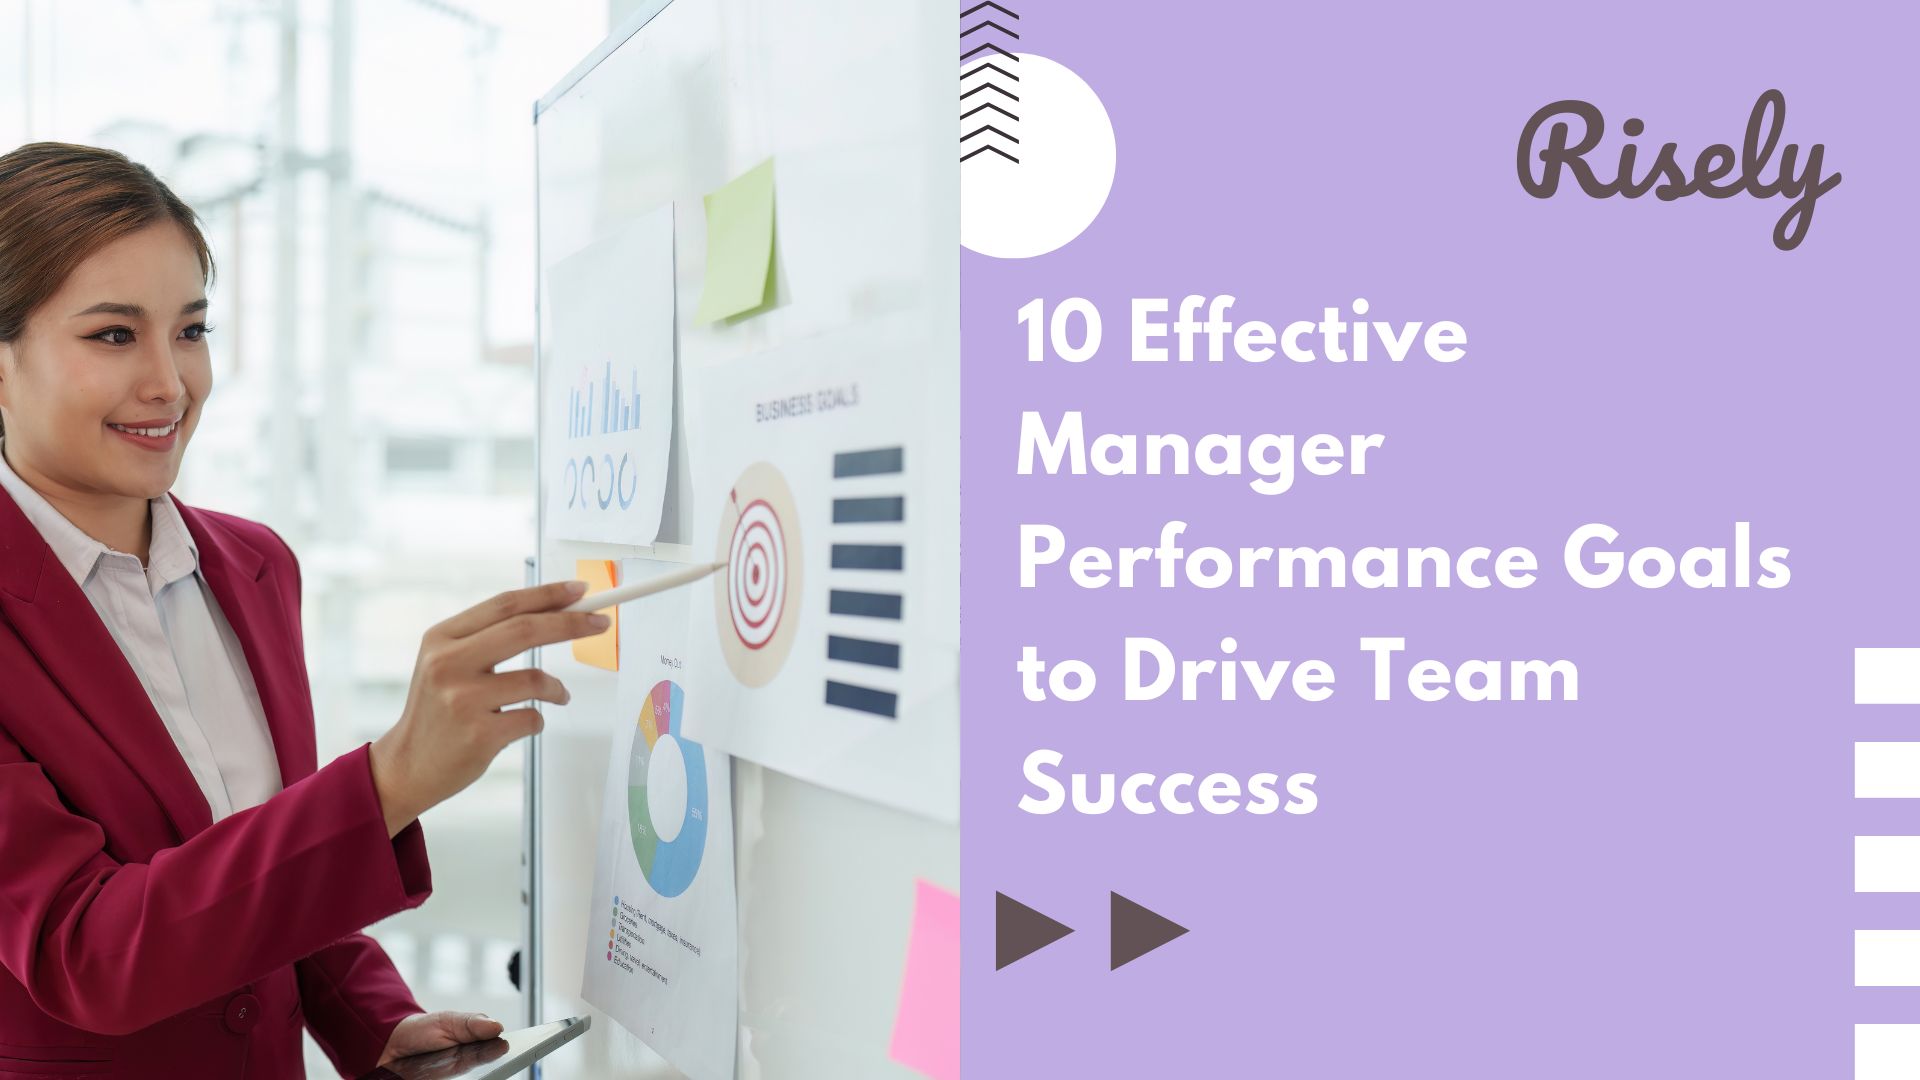 10 Effective Manager Performance Goals to Drive Team Success